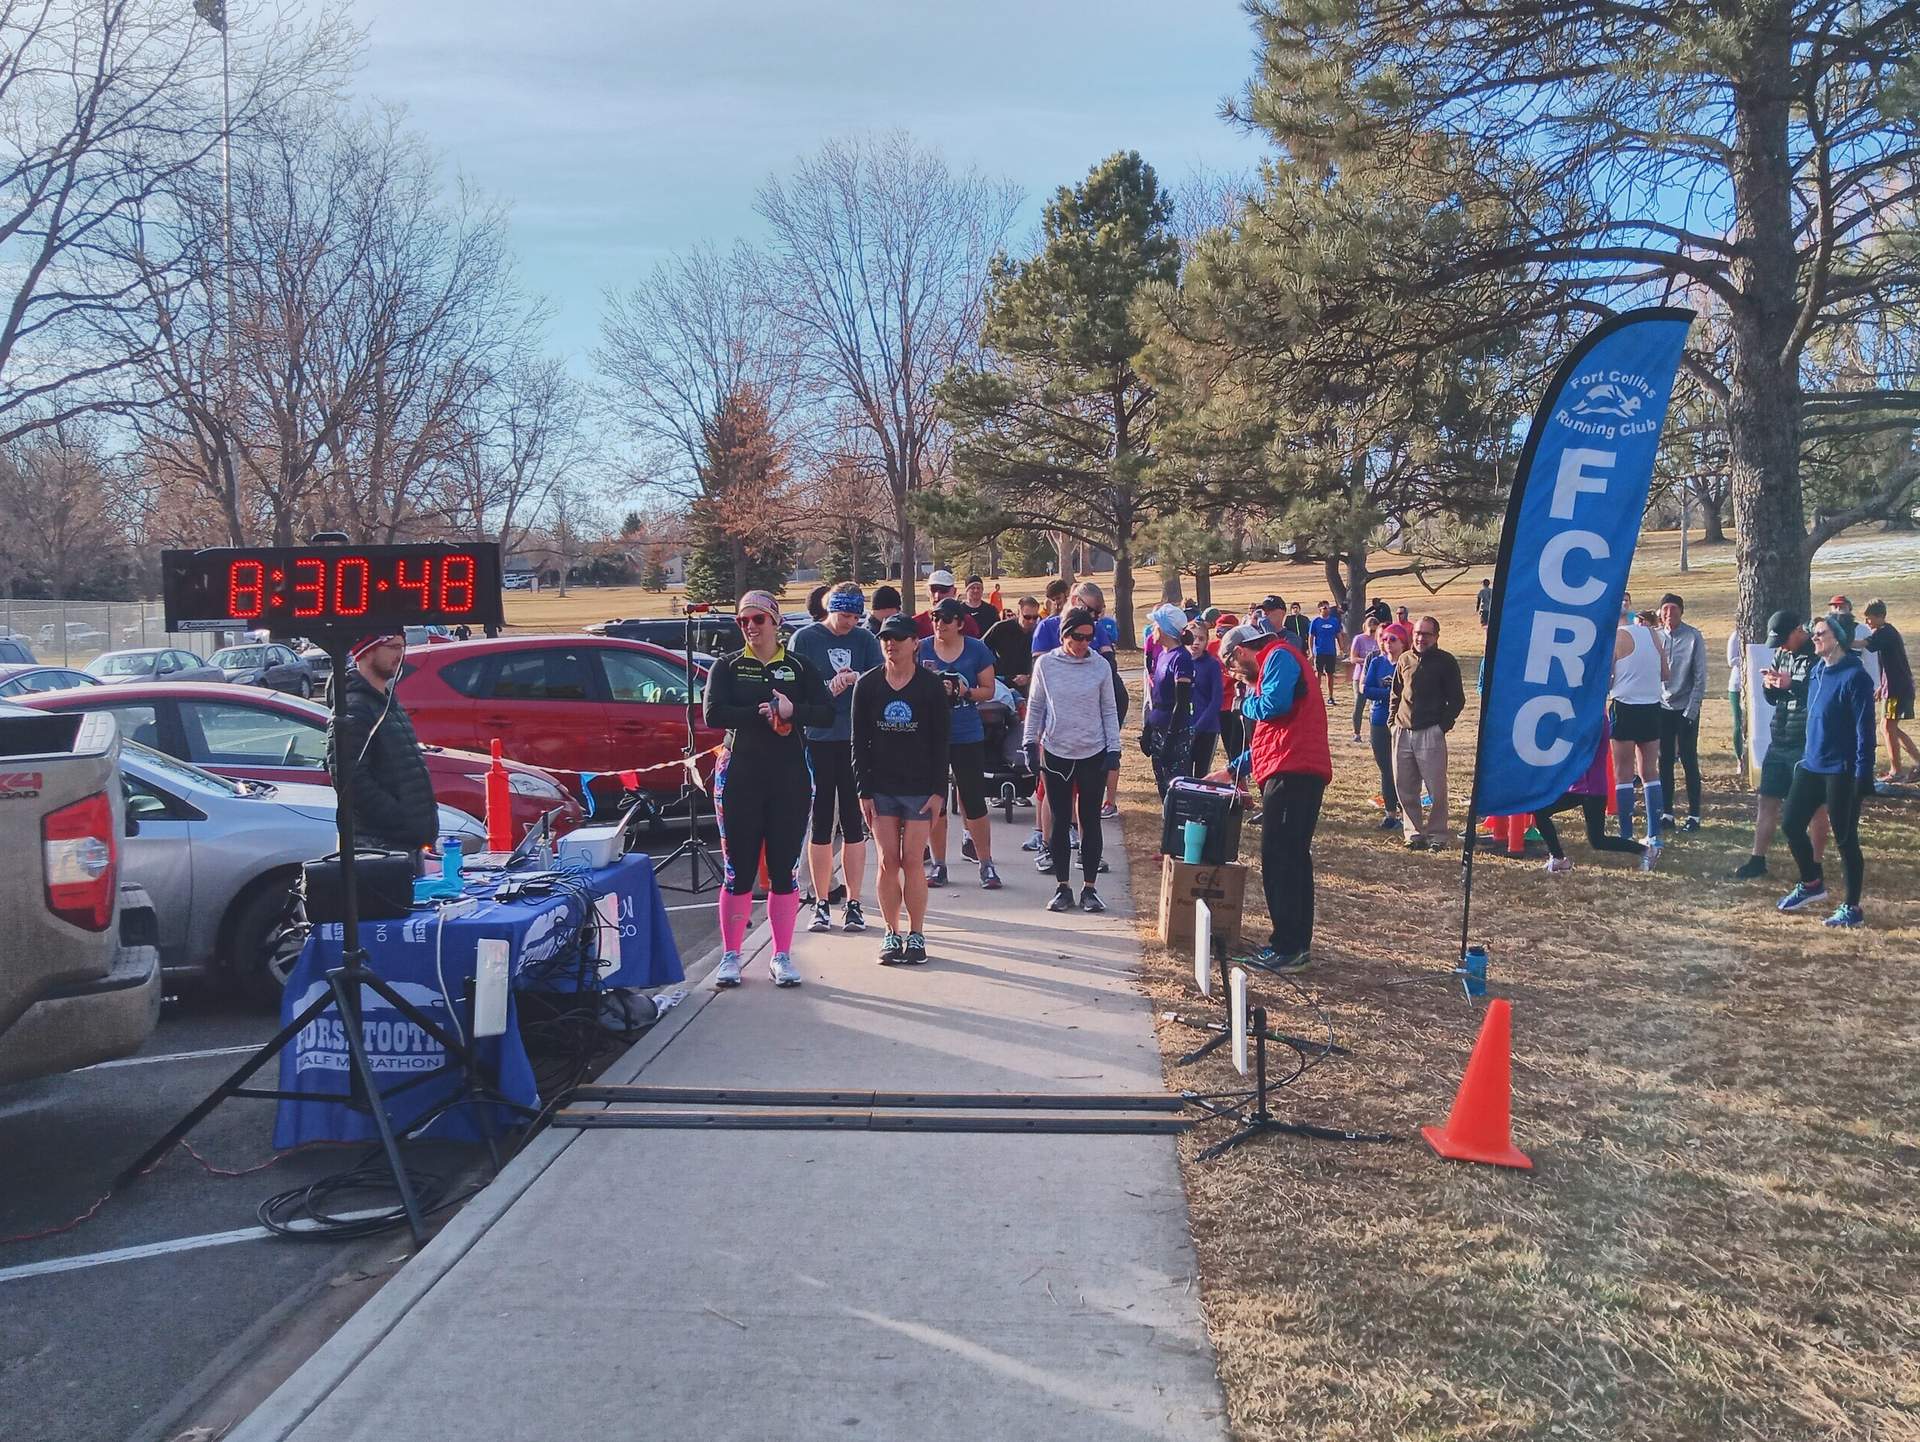 Runners line up for the 8:31 a.m. wave of the 2020 Edora Park 8km Tortoise & Hare race put on by the Fort Collins Running Club (FCRC).